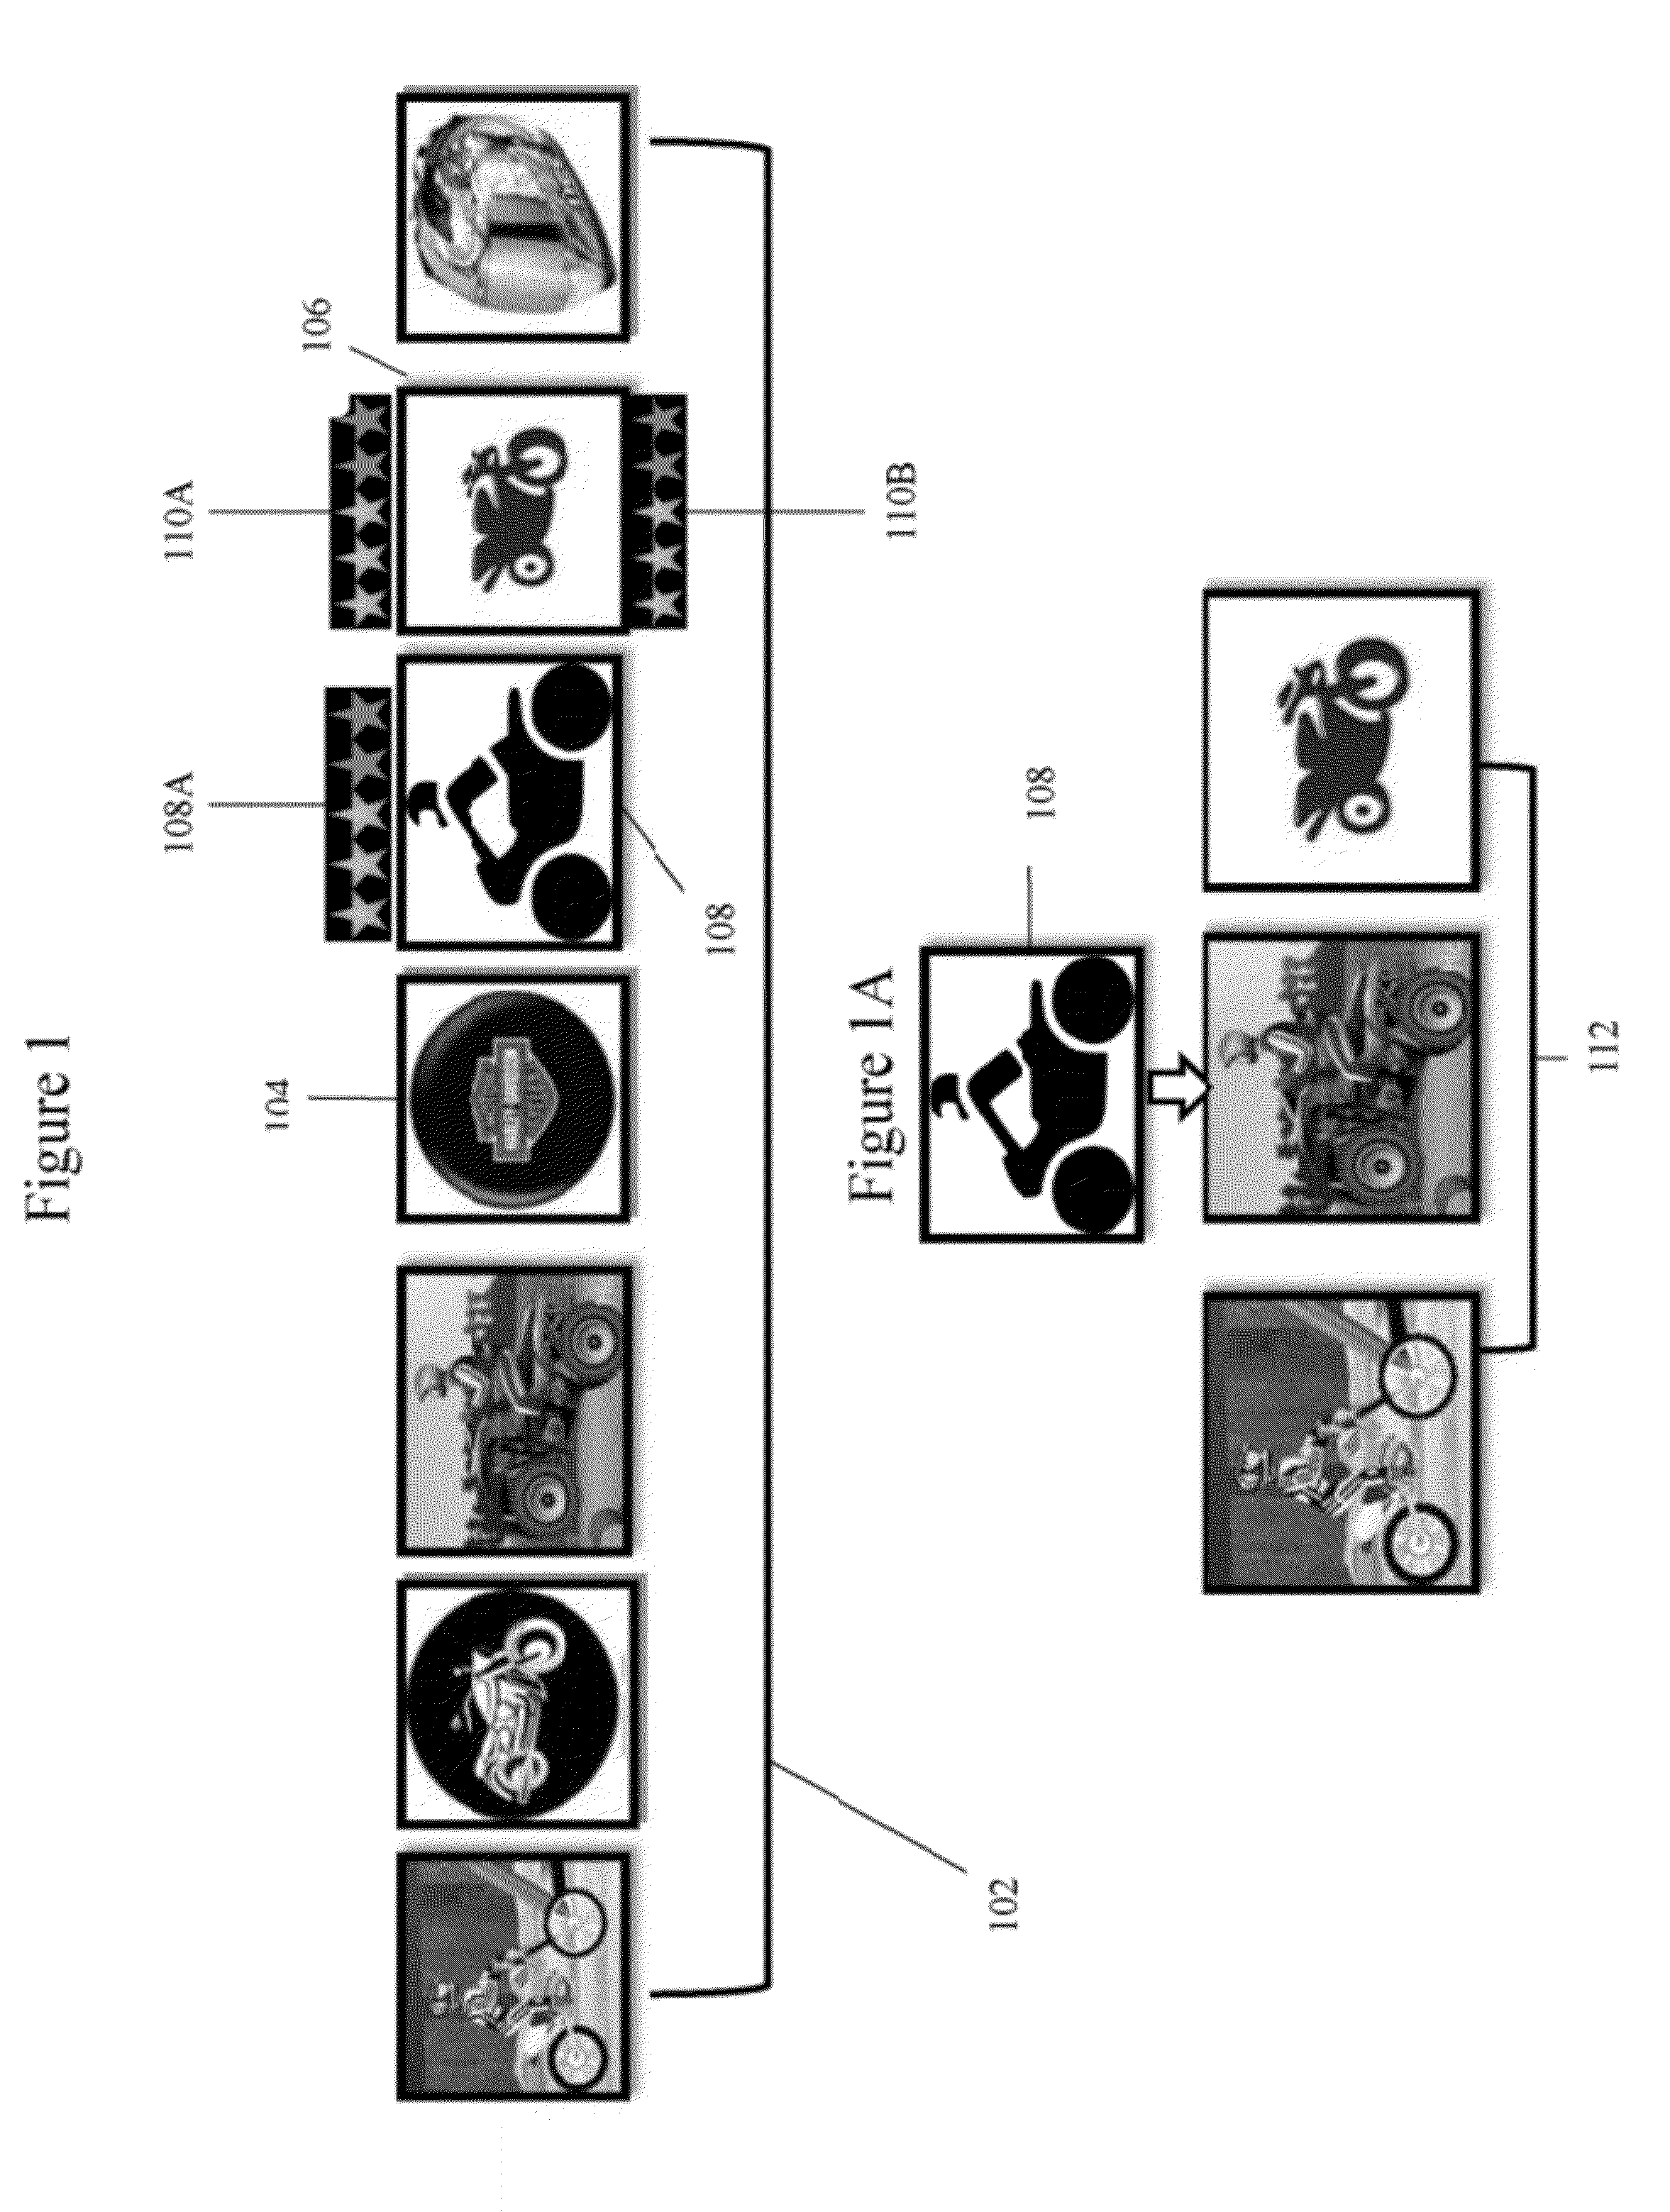 System and method for an interactive mobile-optimized icon-based profile display and associated social network functionality